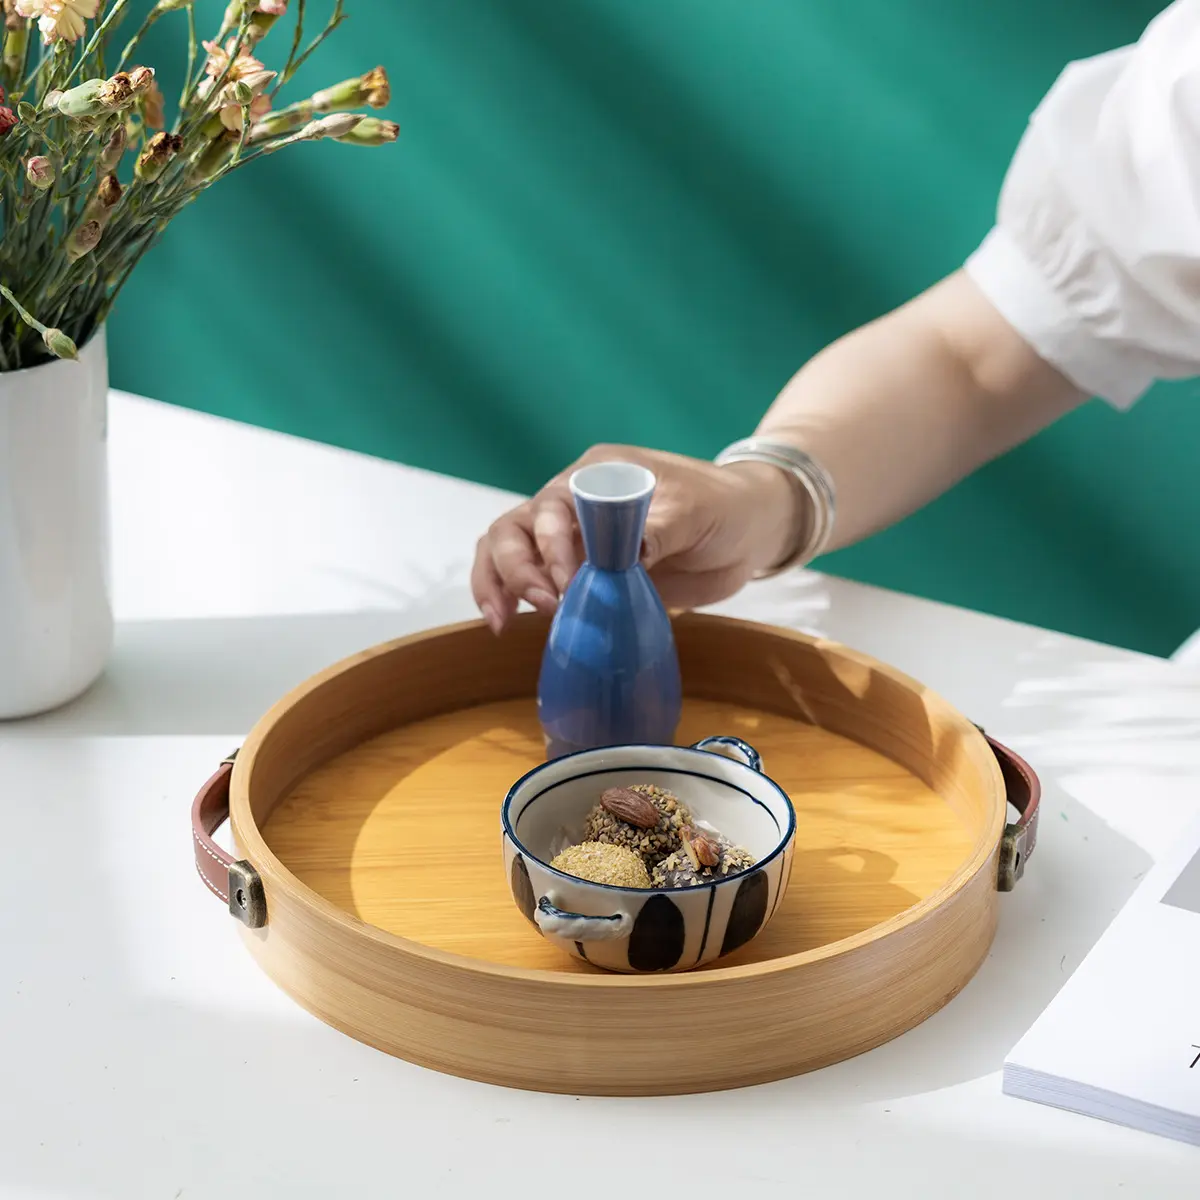 costoms round bamboo food serving trays with handle for party service ECO-friendly Wood Serving Tray for restaurant bar tray